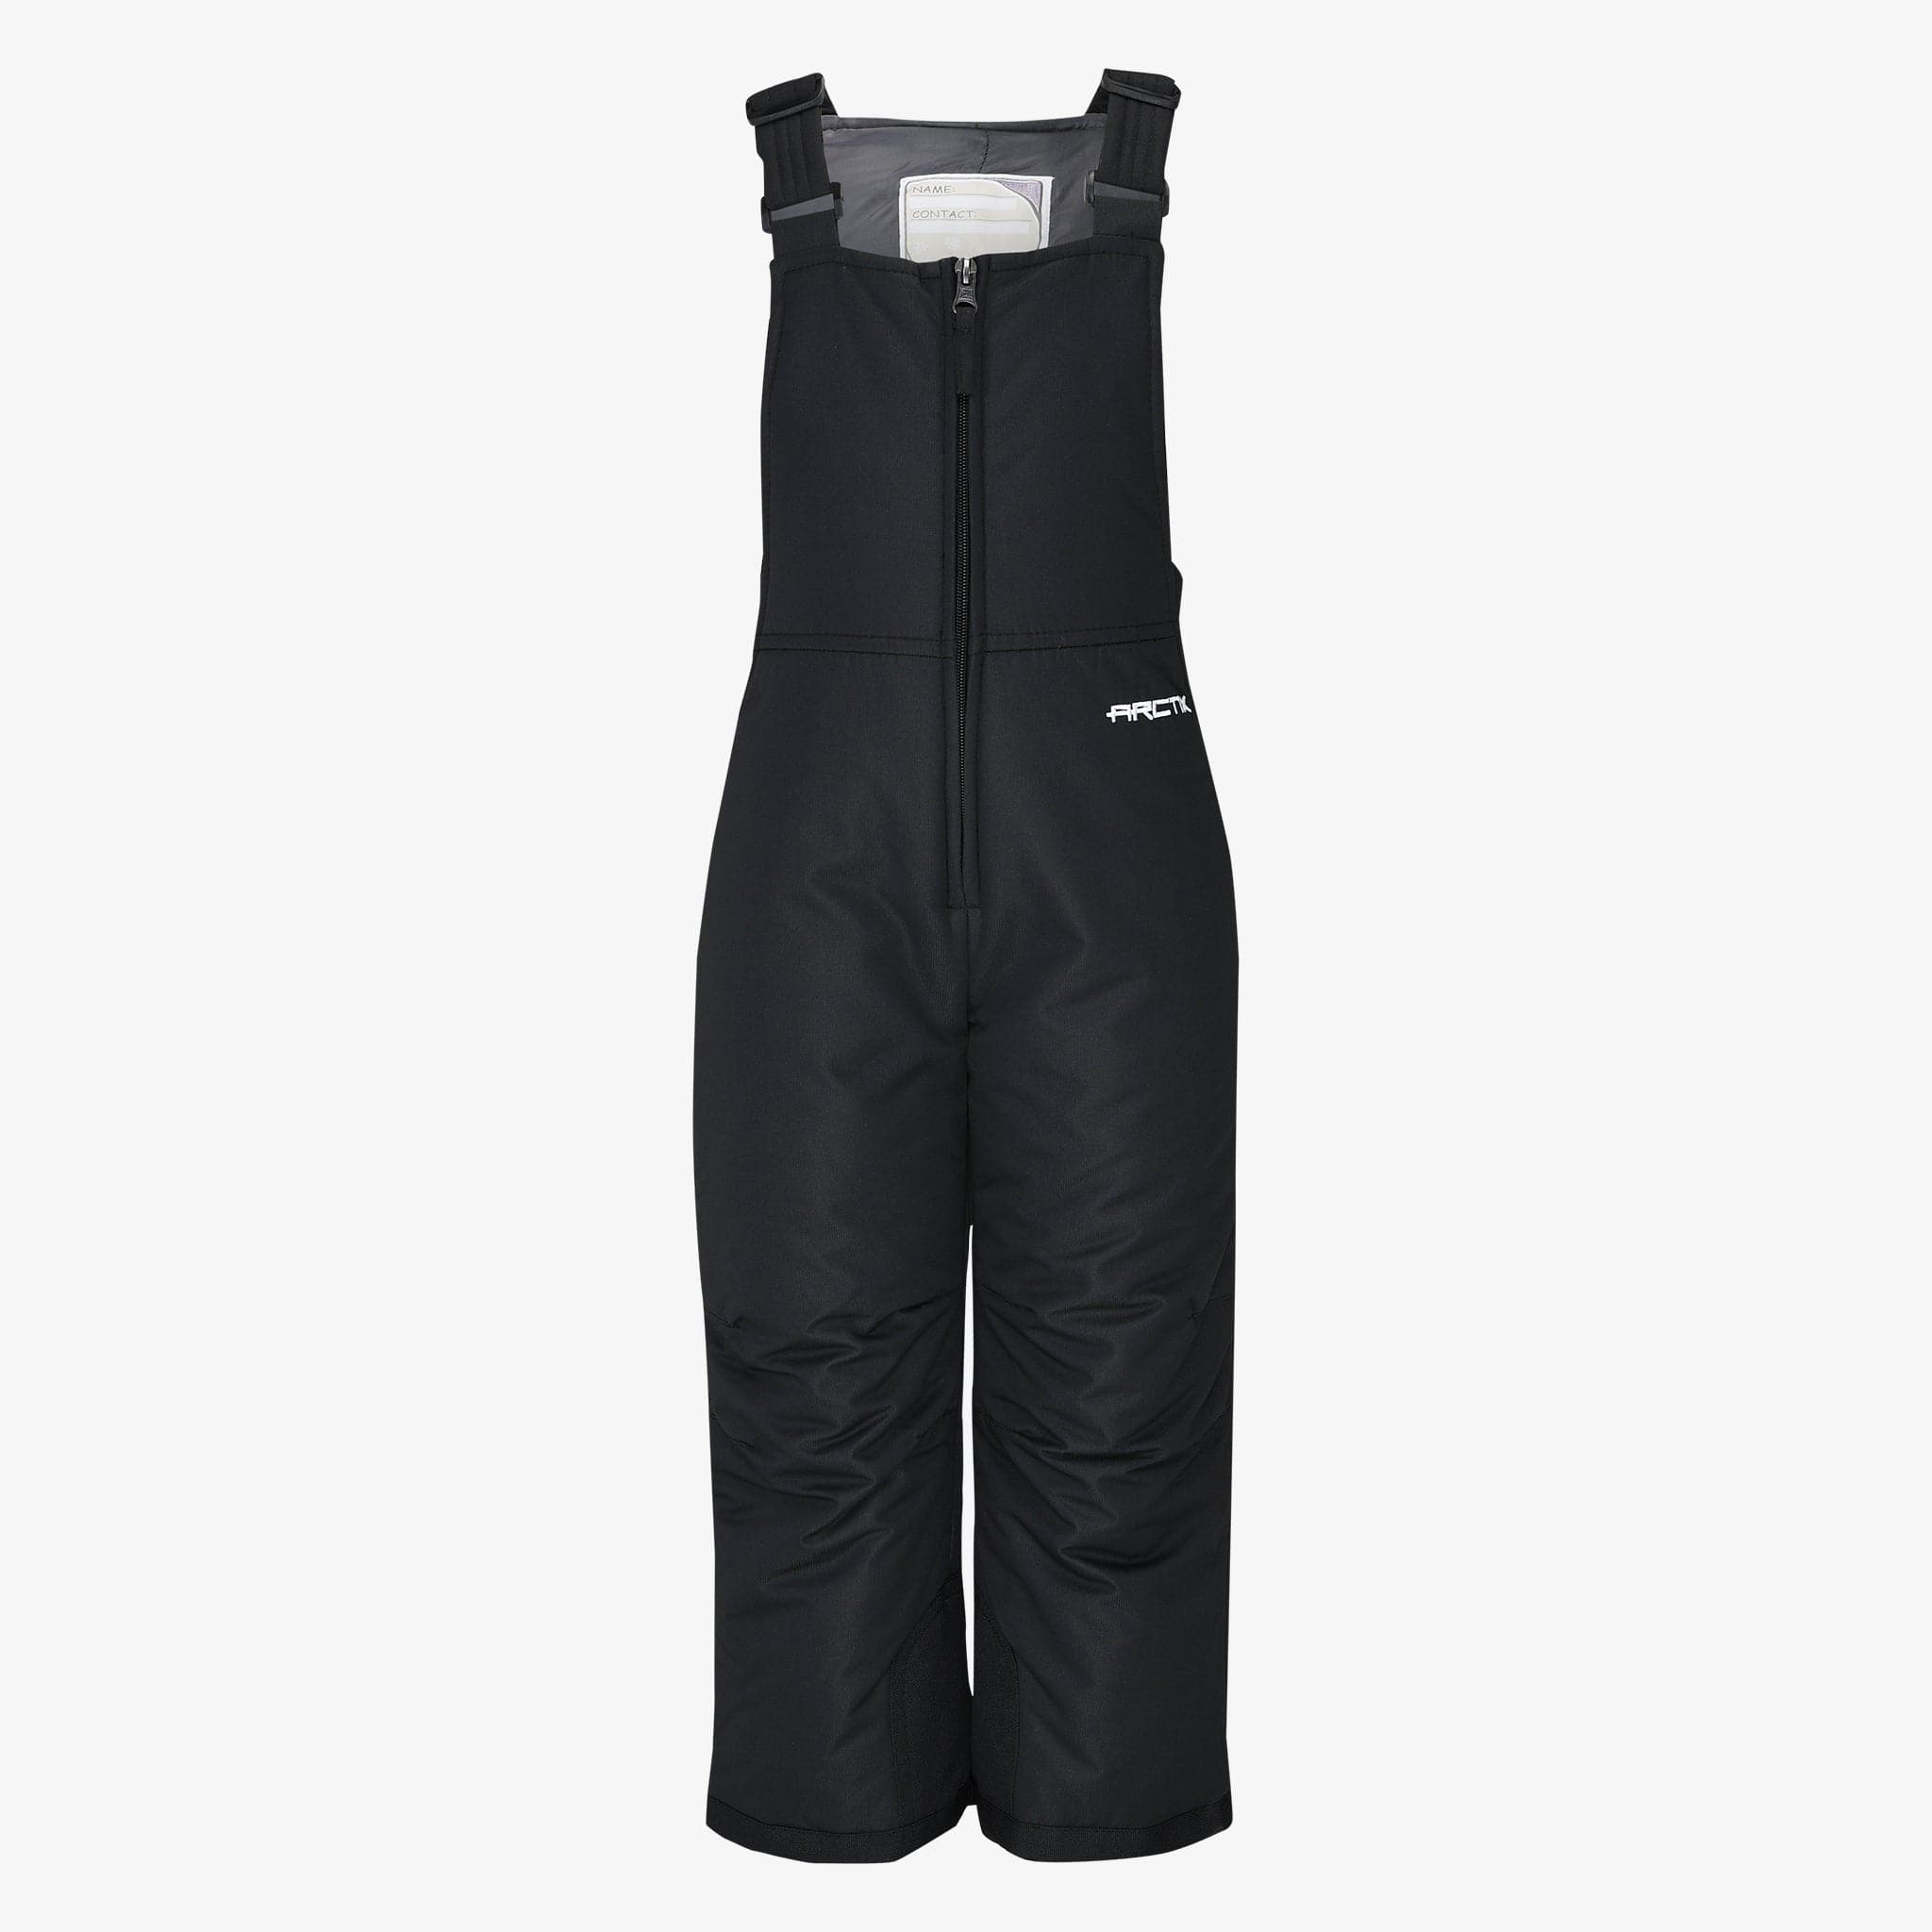 Arctix Men's Tundra Ballistic Bib Overalls with Added Visibility, Packers  Green, XX-Large (44-46W 36L)並行輸入